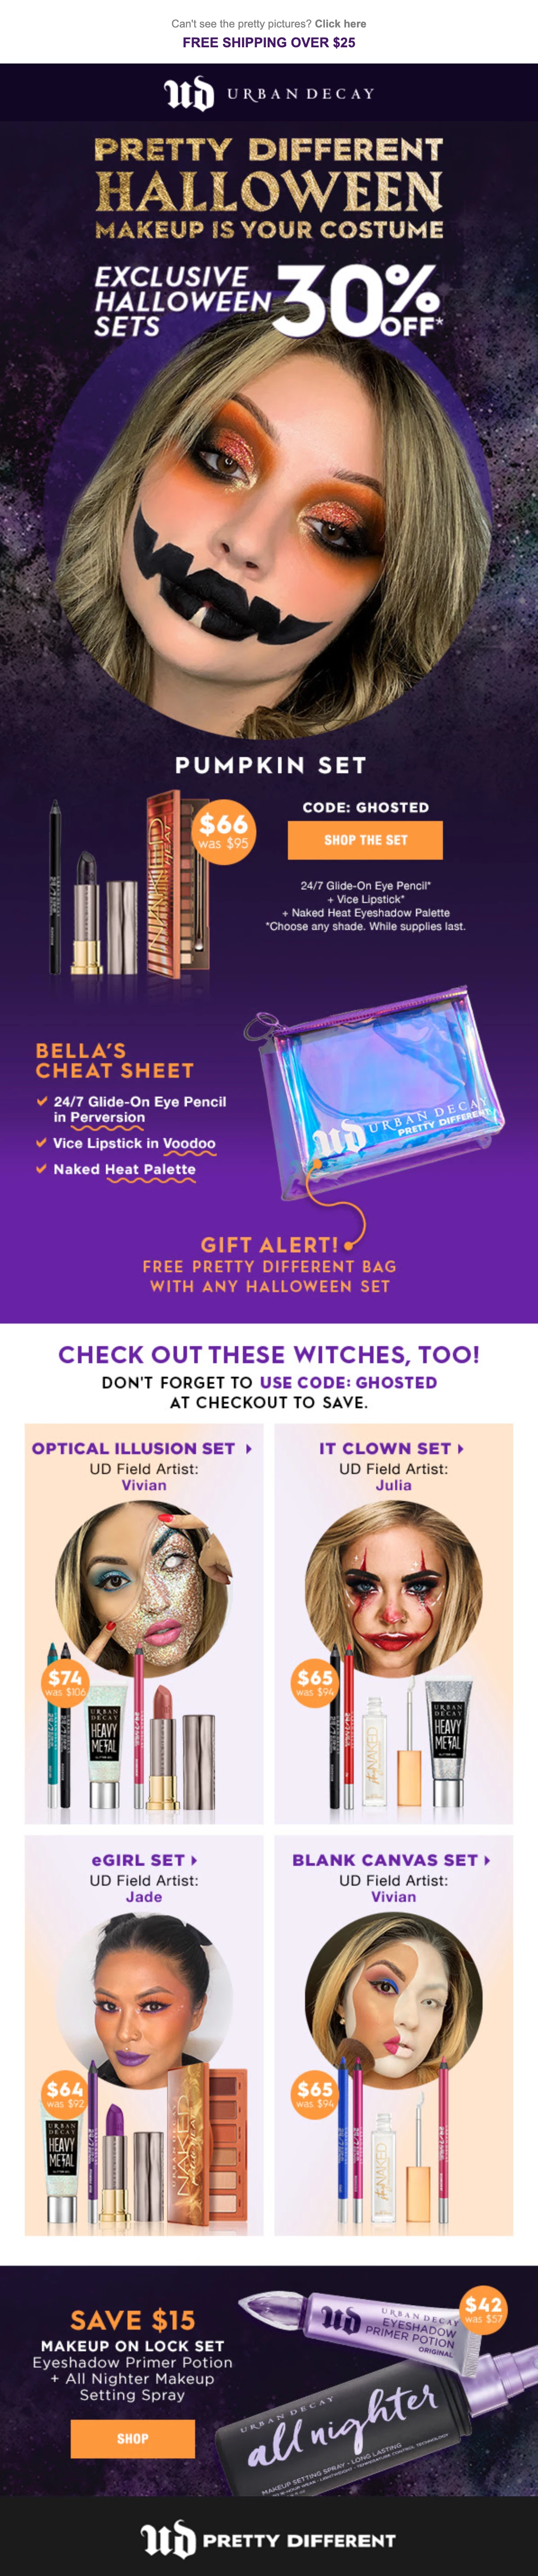 Urban decay halloween promotion email with images of Halloween make up 